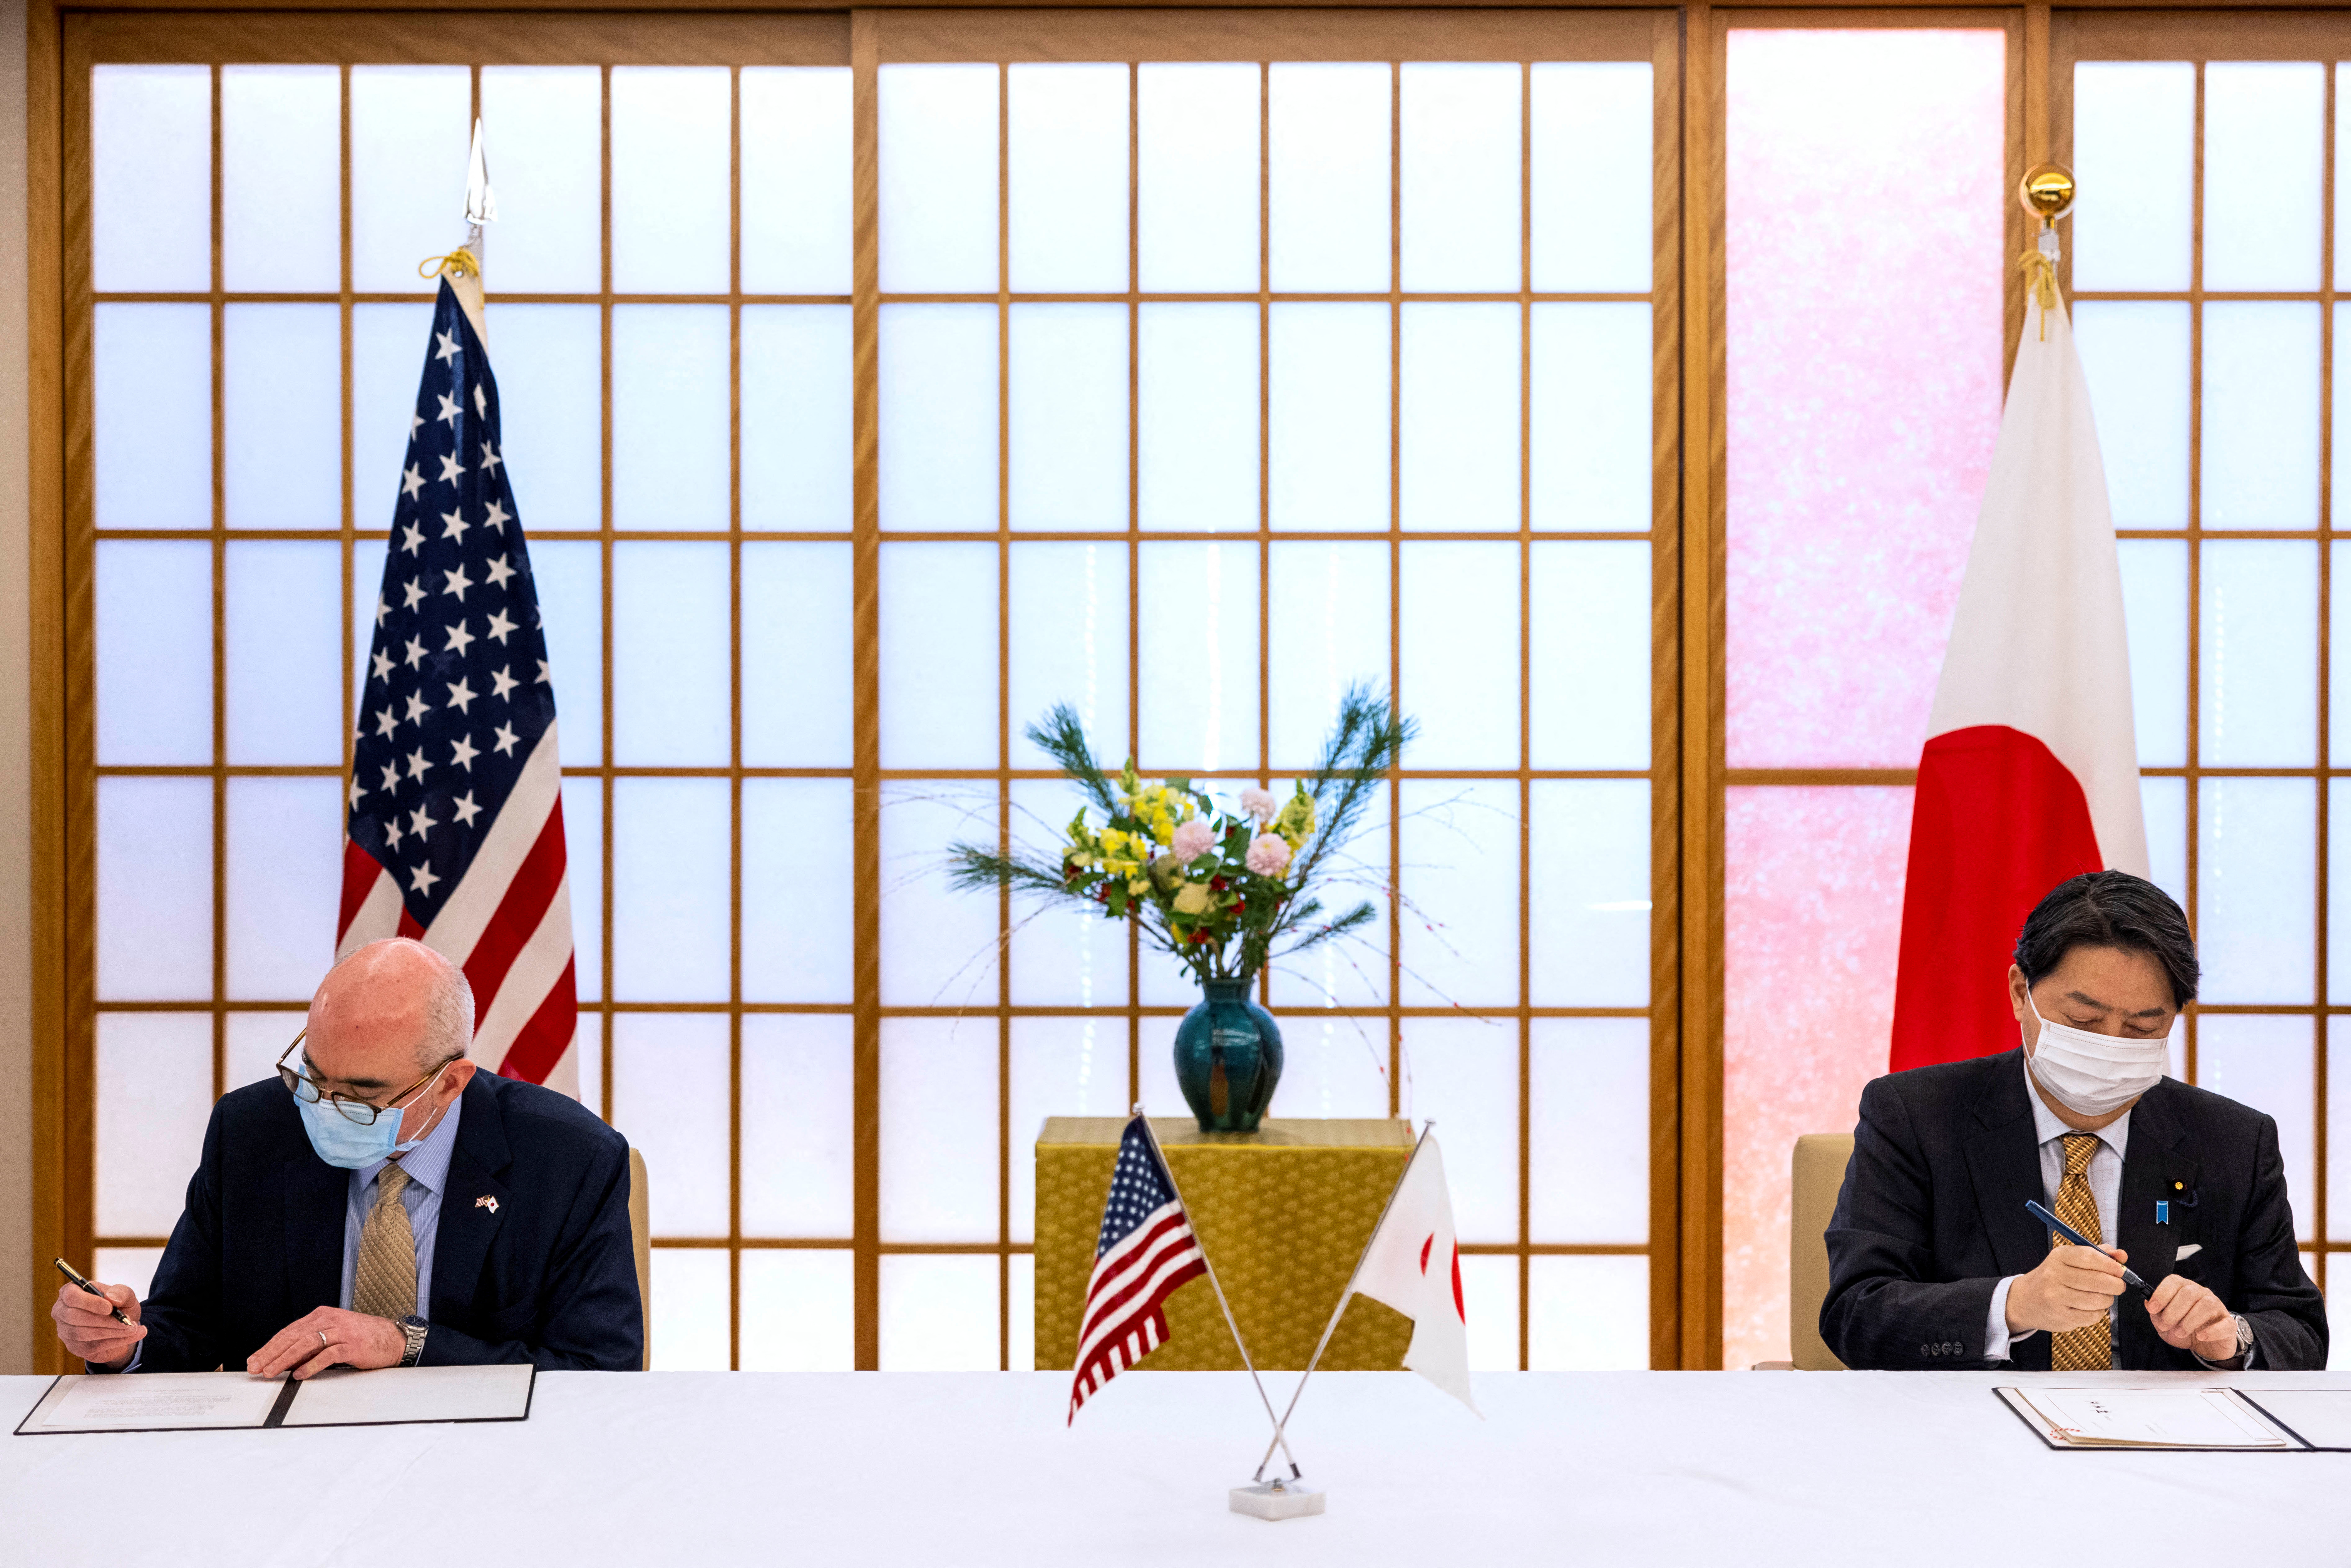 Japan's Foreign Minister Yoshimasa Hayashi and Raymond F. Greene, charge d'affairs ad interim of the U.S. embassy in Japan sign the New Special Measures Agreement (SMA) and Japan-U.S. Joint Research in Tokyo